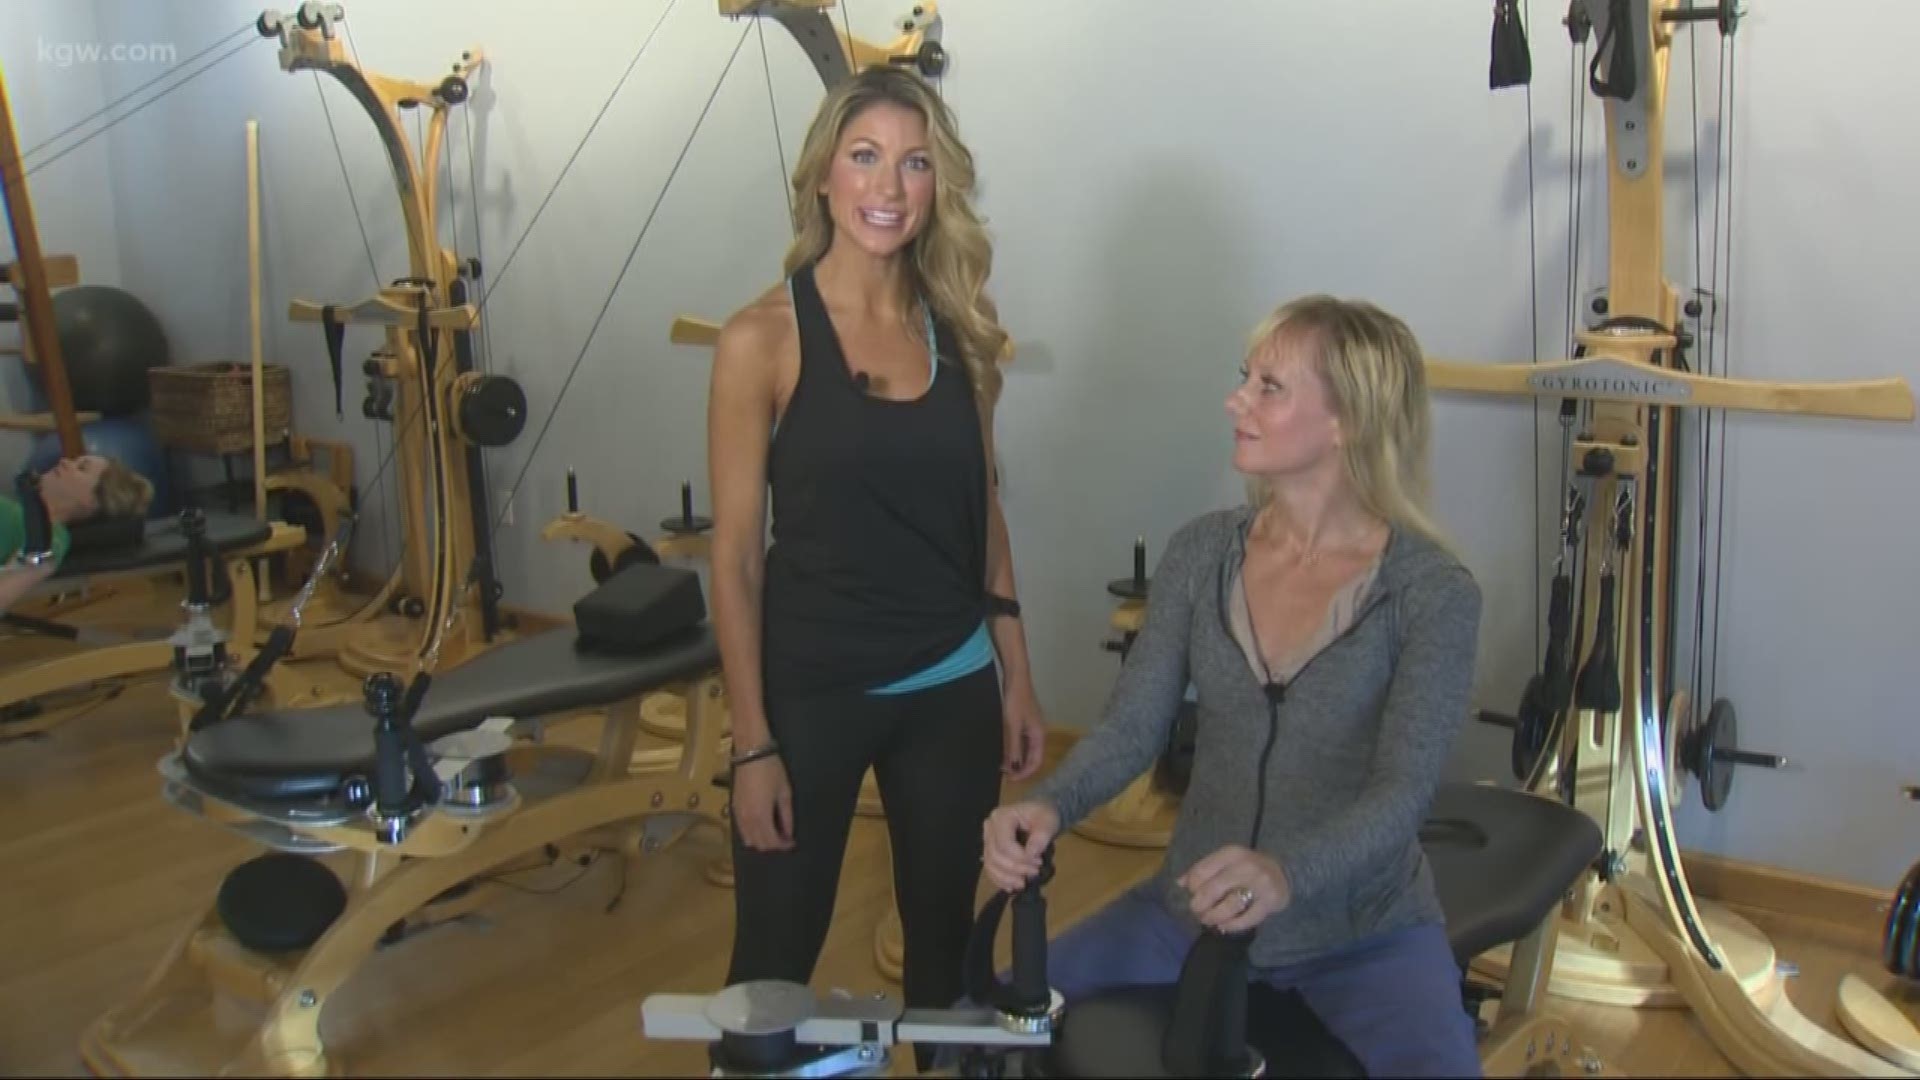 Need a new fun workout for fall?  We are checking out a few cool new methods to stay fit this season.